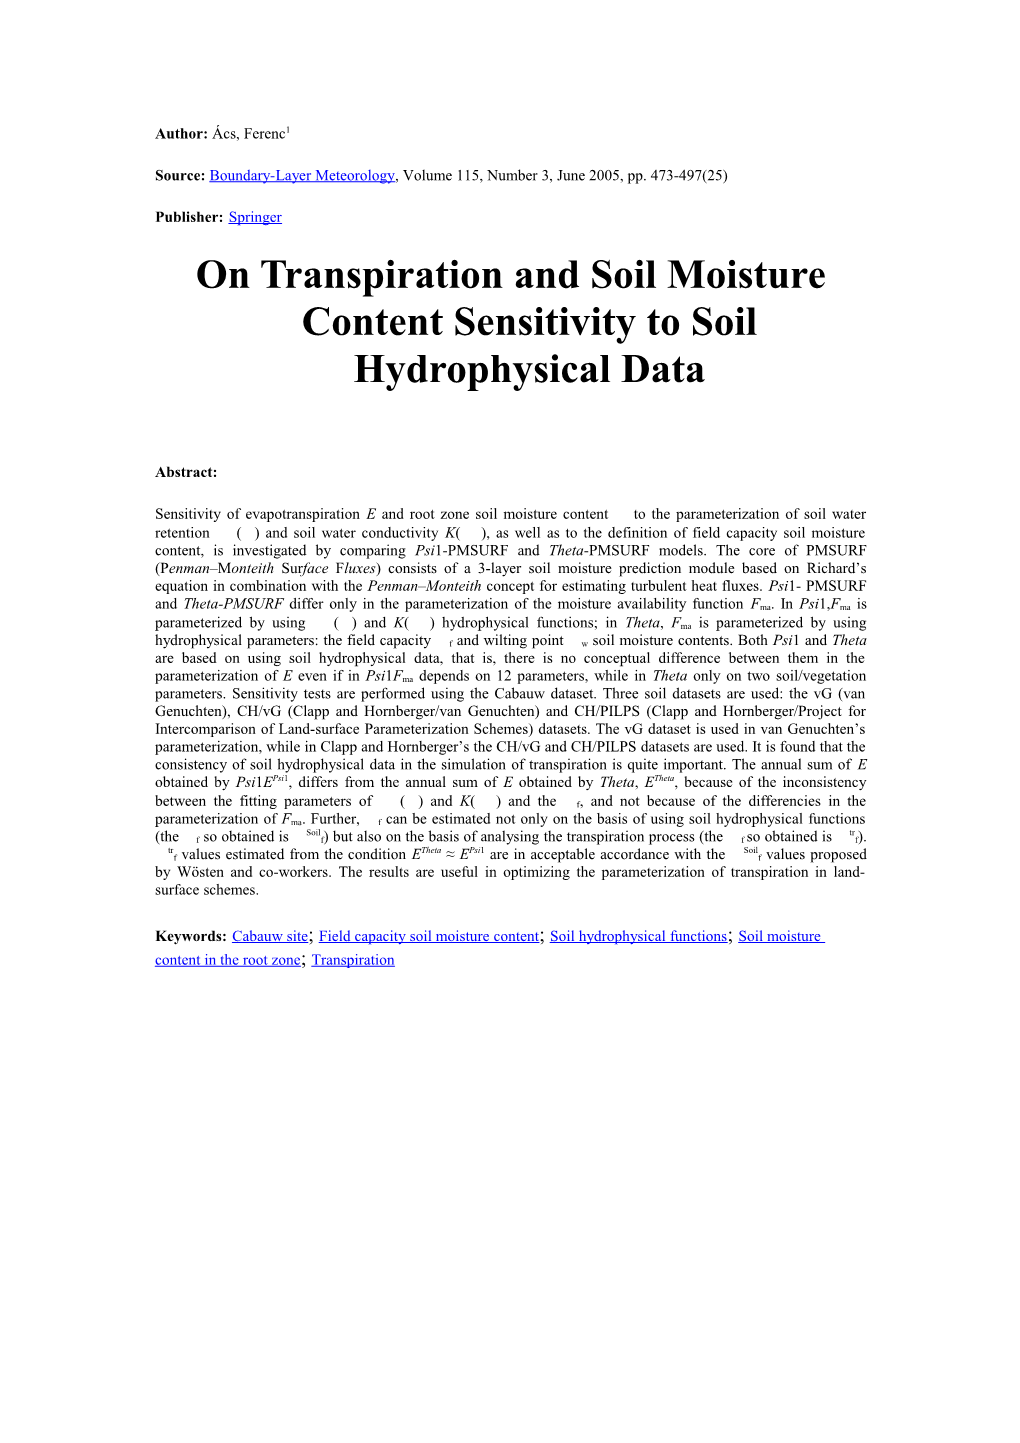 On Transpiration and Soil Moisture Content Sensitivity to Soil Hydrophysical Data